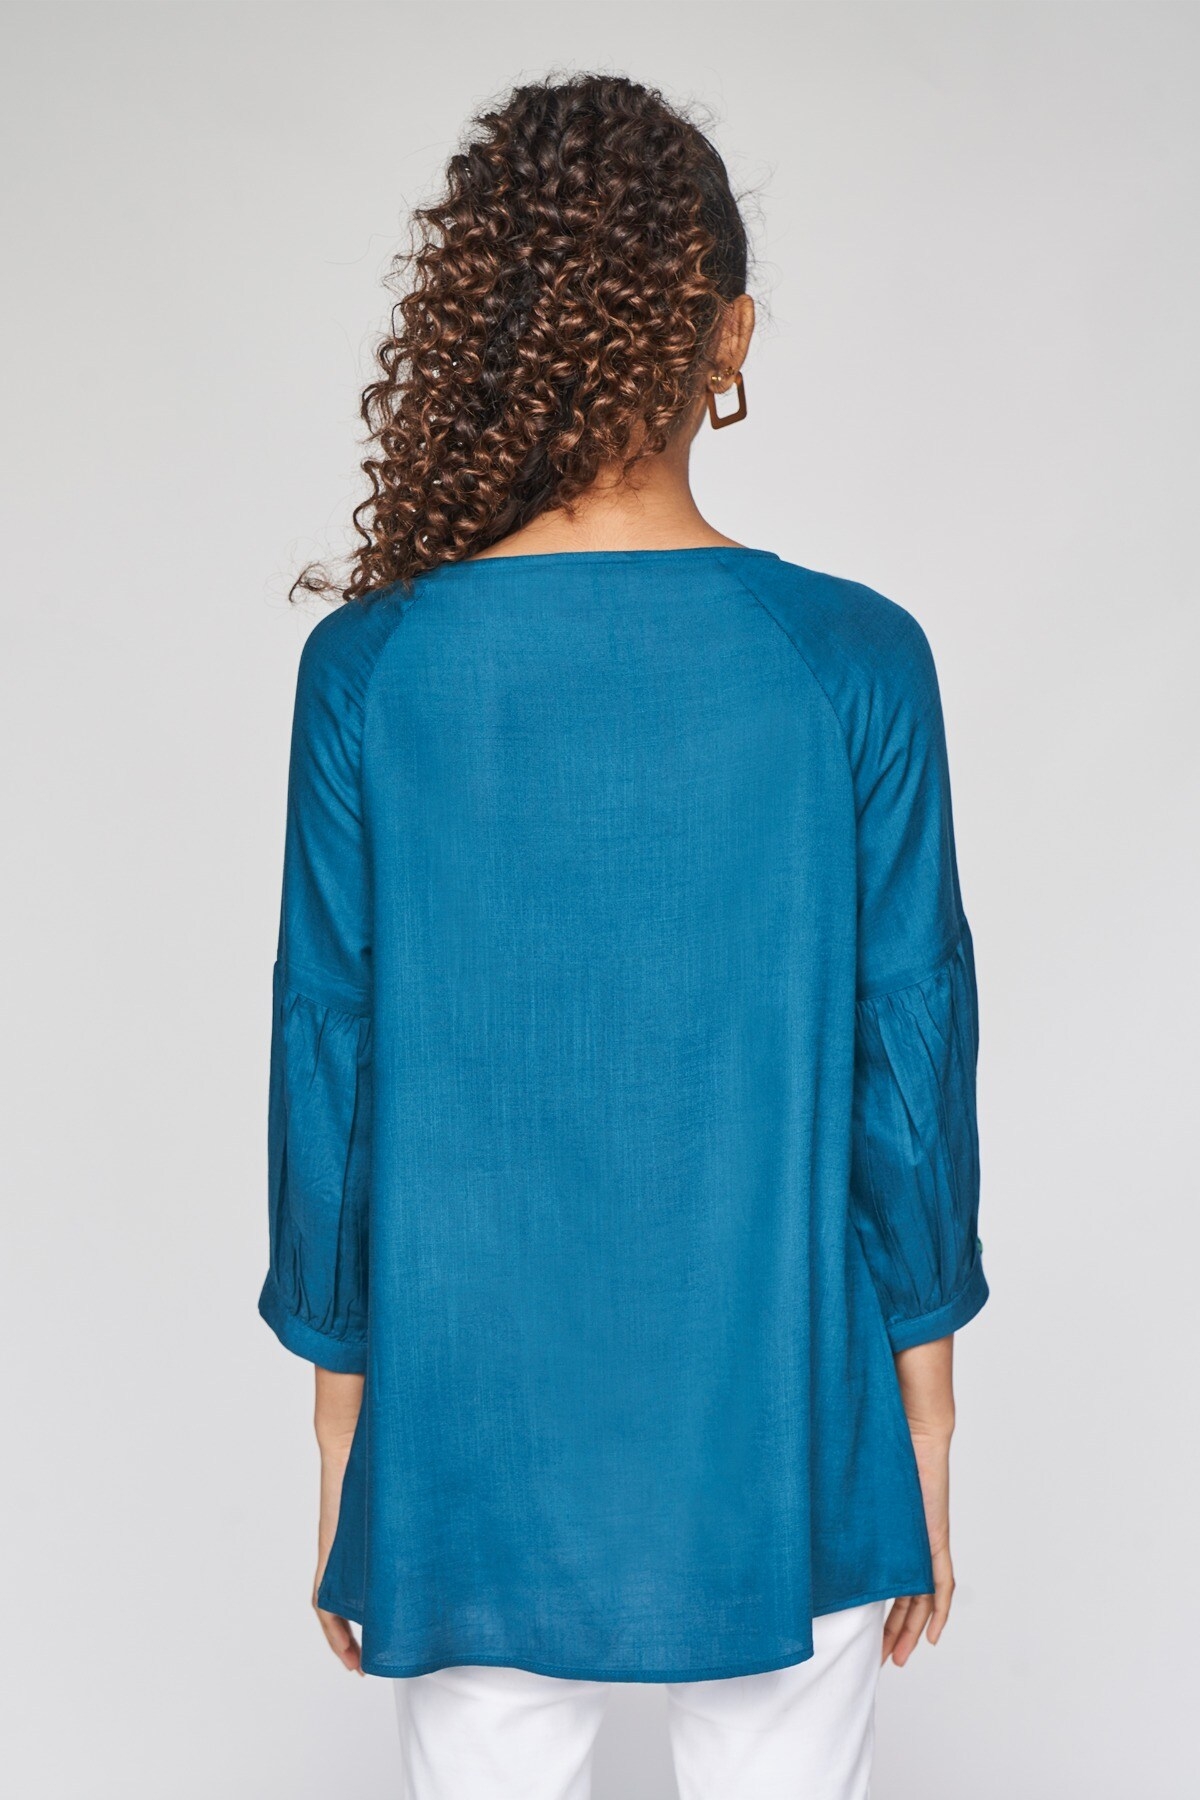 Global Desi | Teal Embroidered Fit and Flare Top 4